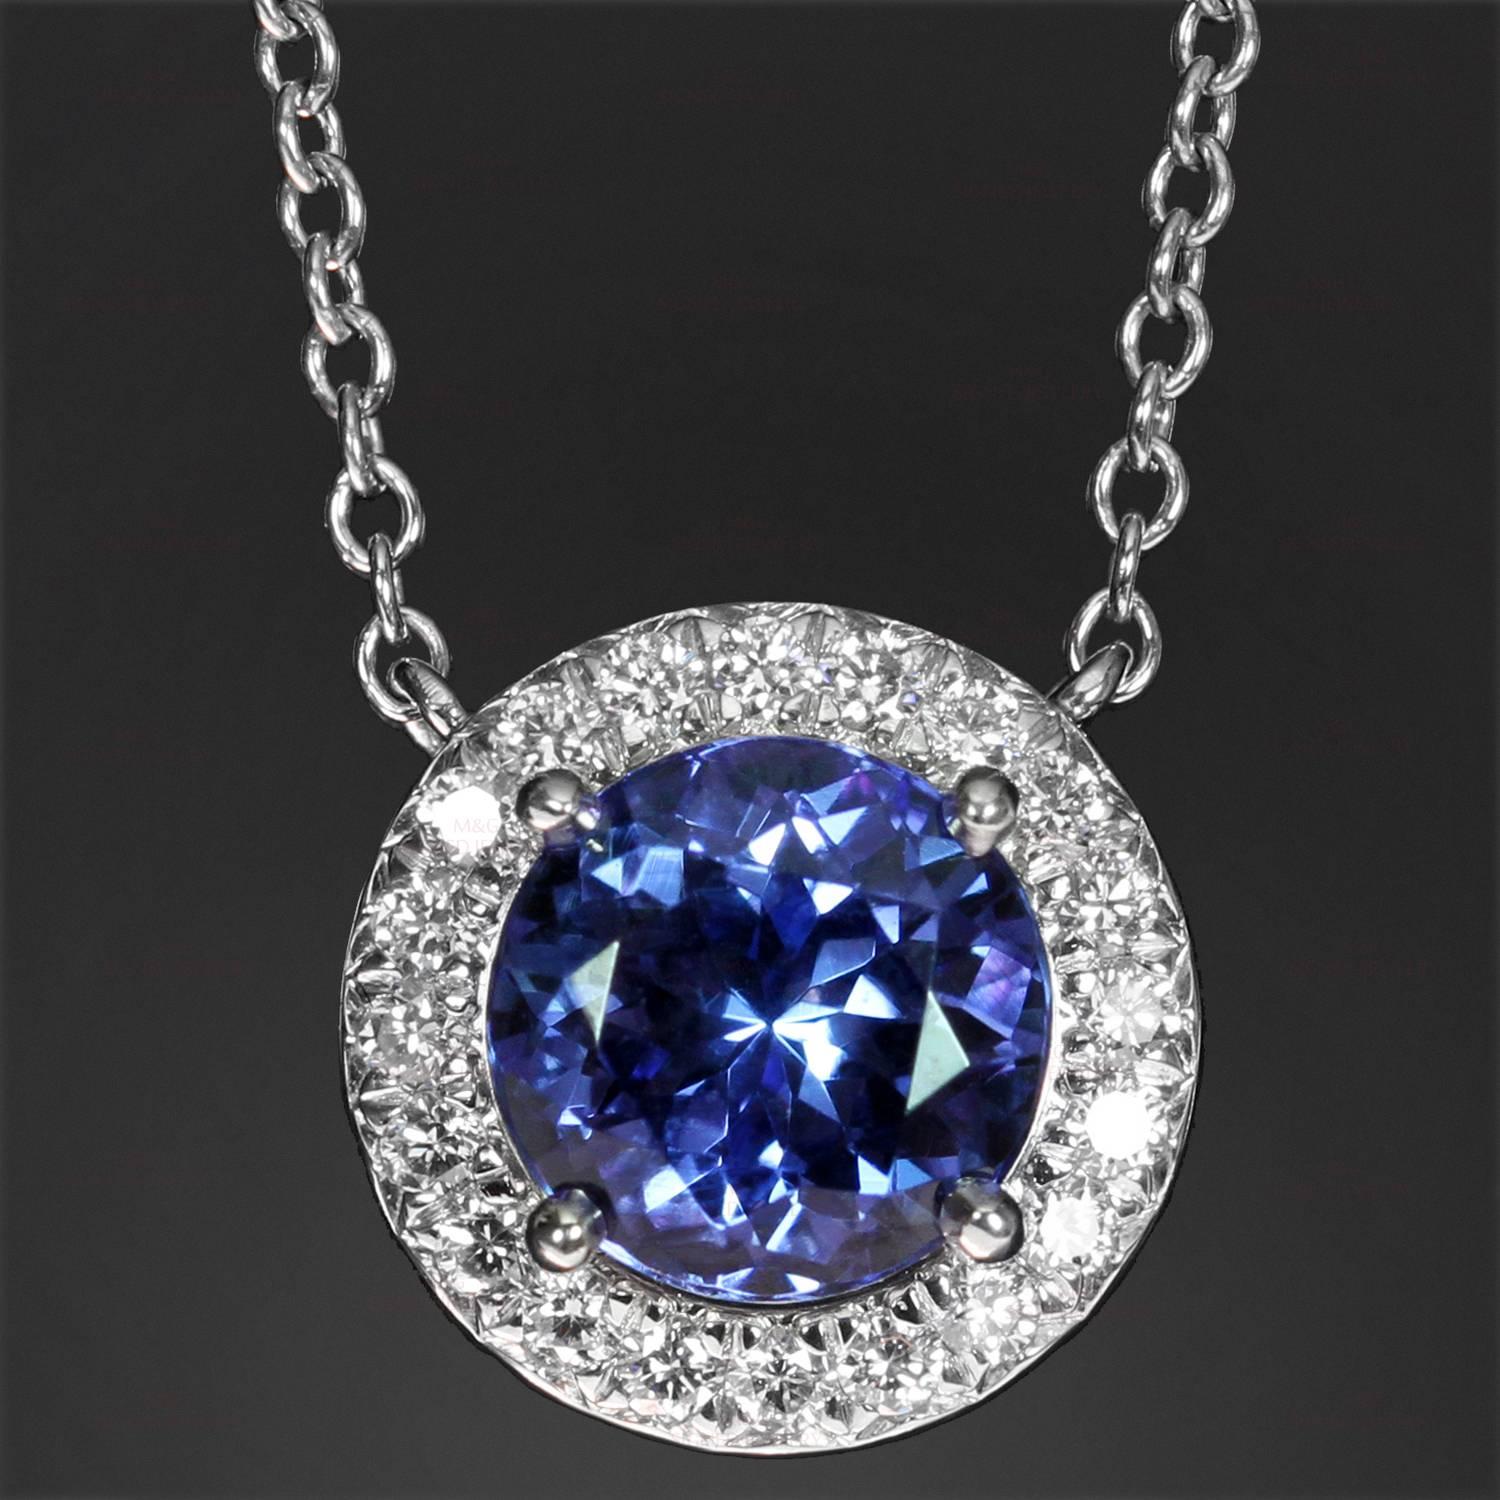 This stunning necklace from Tiffany's Soleste collection is crafted in platinum and features a round pendant set with a dazzling tanzanite of an estimated 0.70 carats surrounded by brilliant-cut round diamonds of an estimated 0.10 carats. Made in